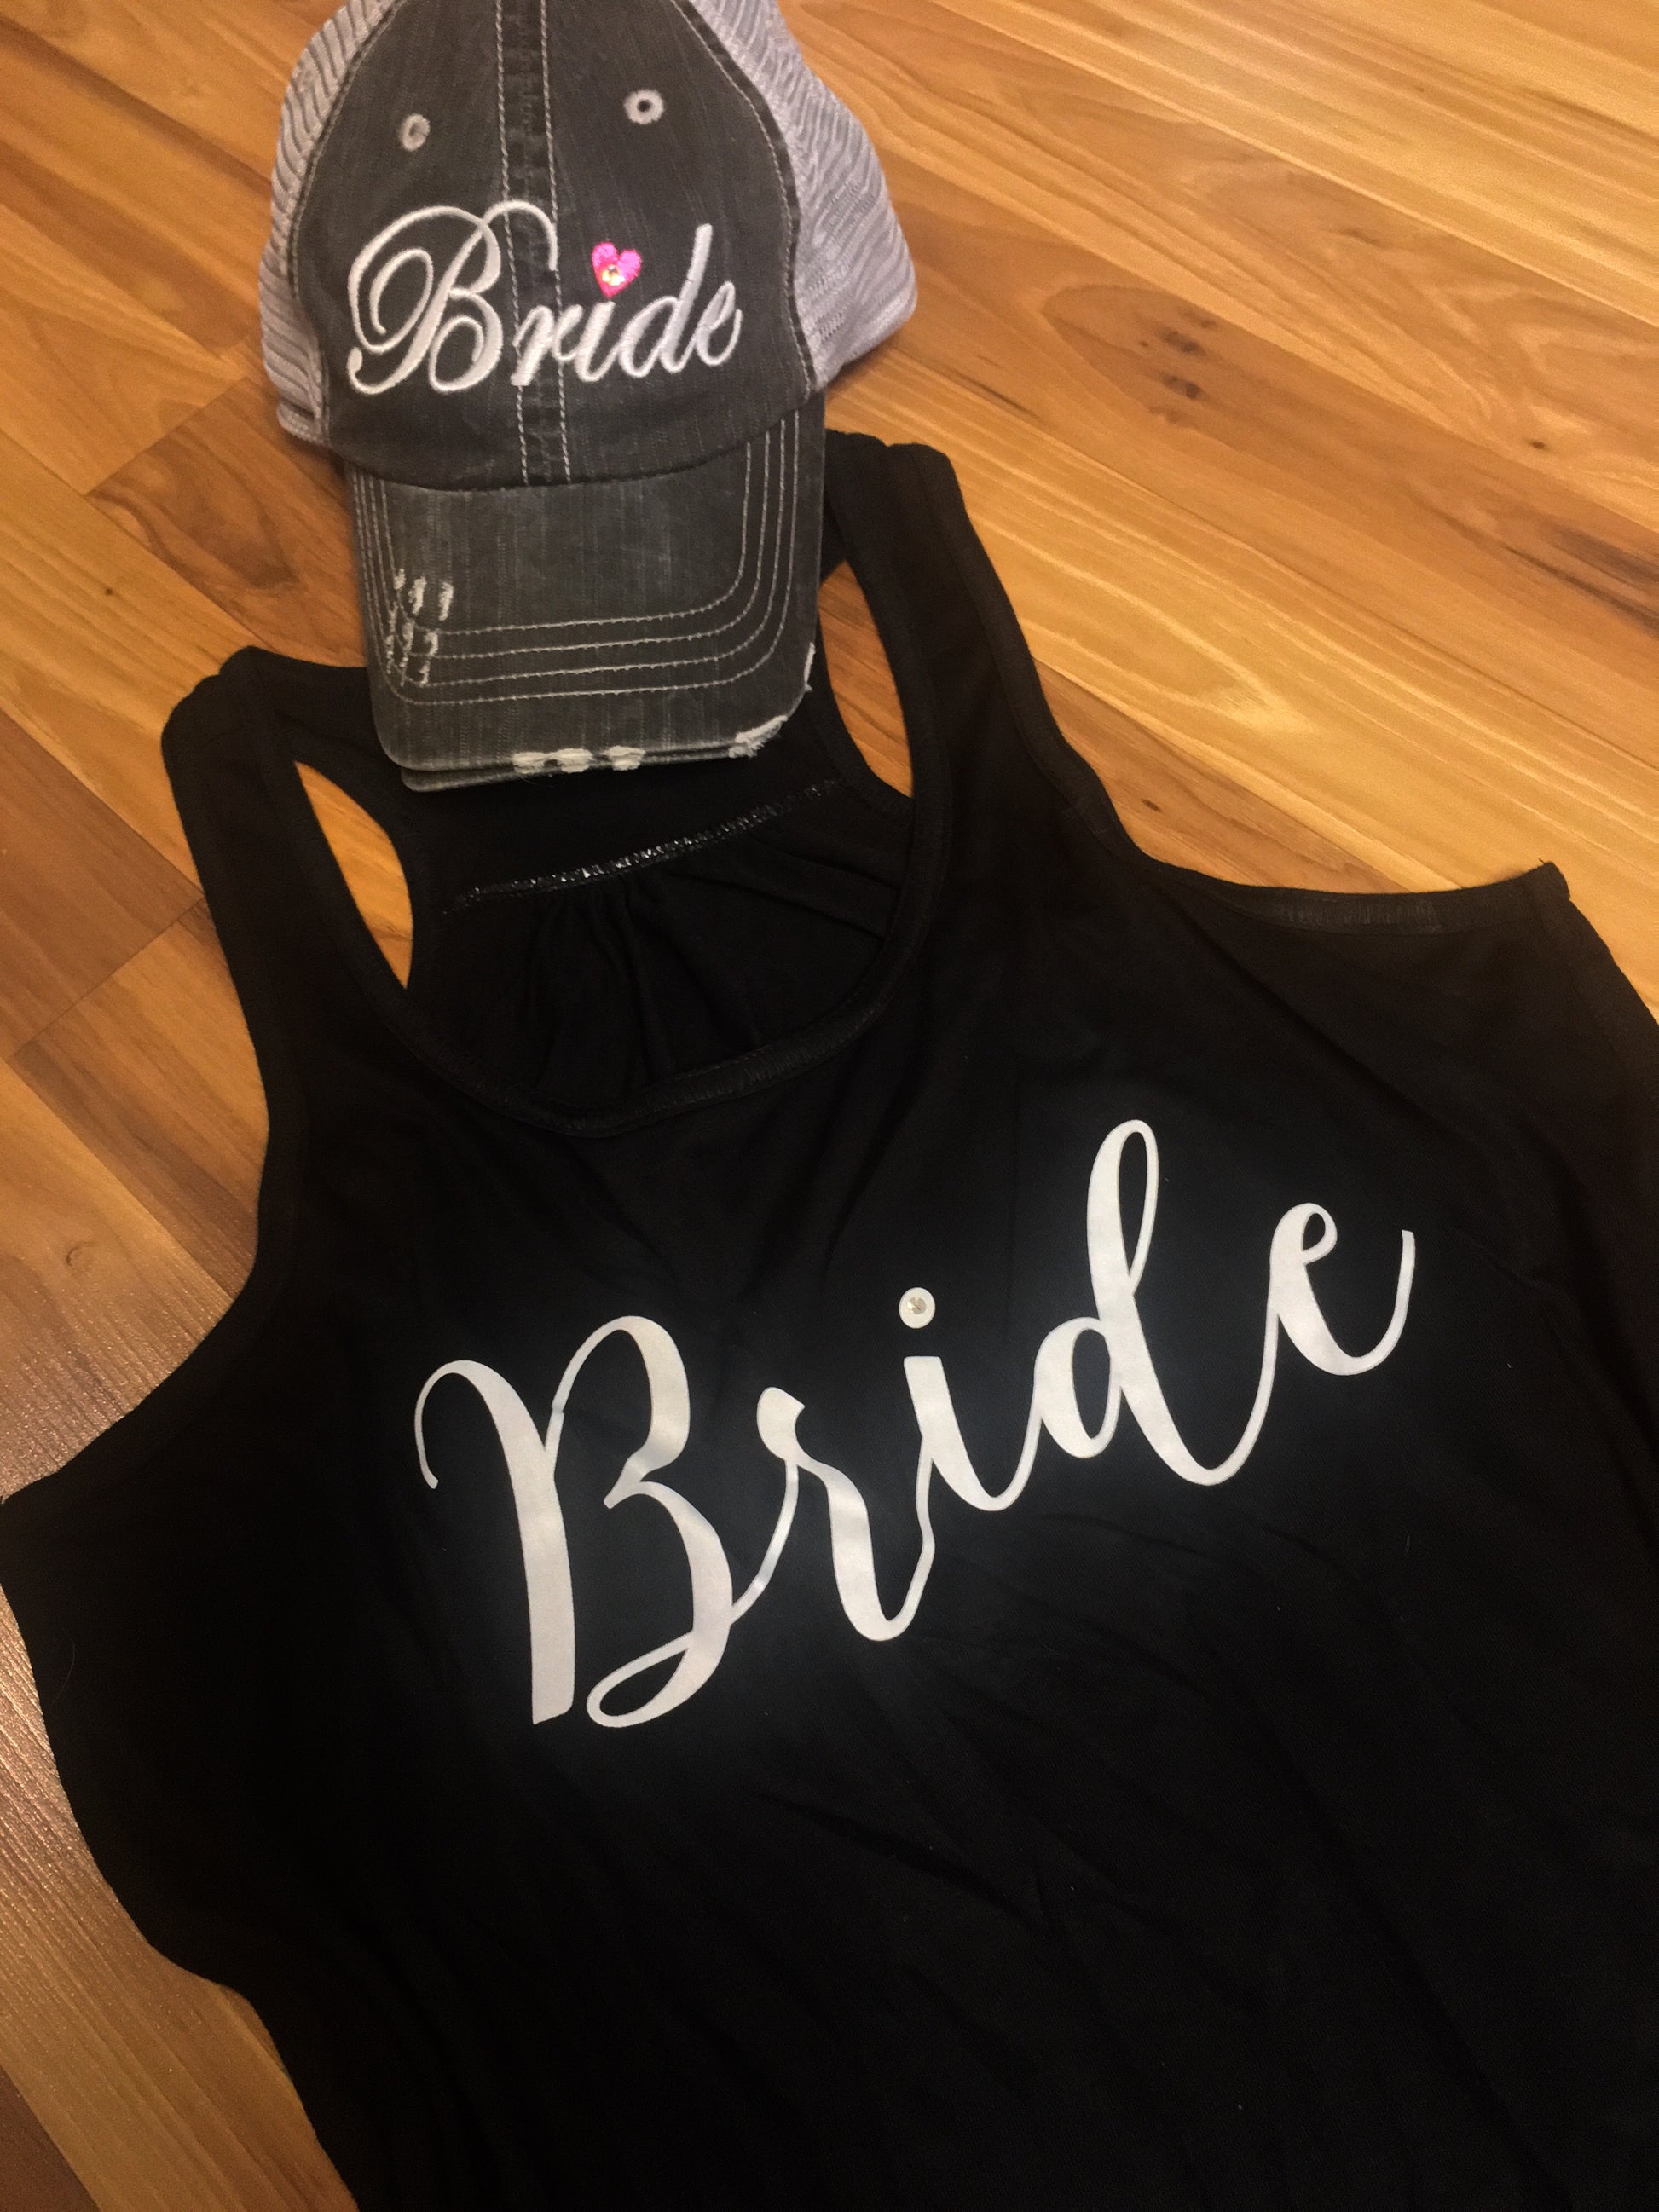 Hats and tanks { Bride } 1 gray hat $12 clearance. 1 black XL tank $15 clearance. - Stacy's Pink Martini Boutique